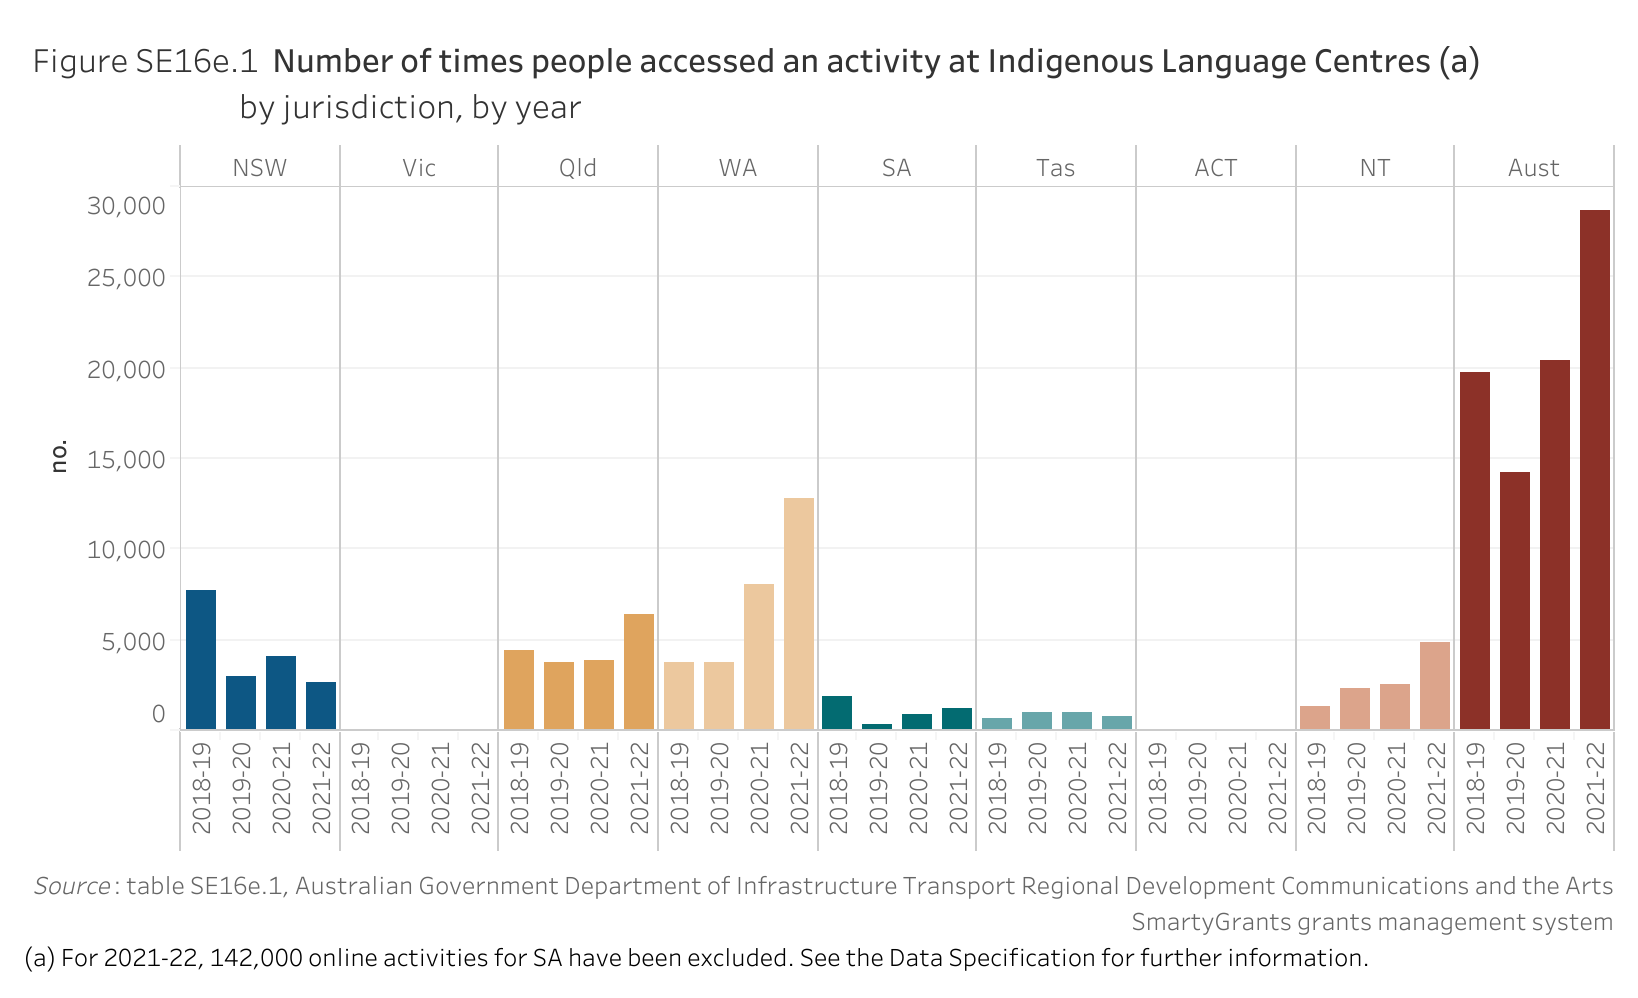 Figure SE16e.1 shows the number of times people accessed an activity at Indigenous Language Centres, by jurisdiction, by year. More details can be found within the text near this image.